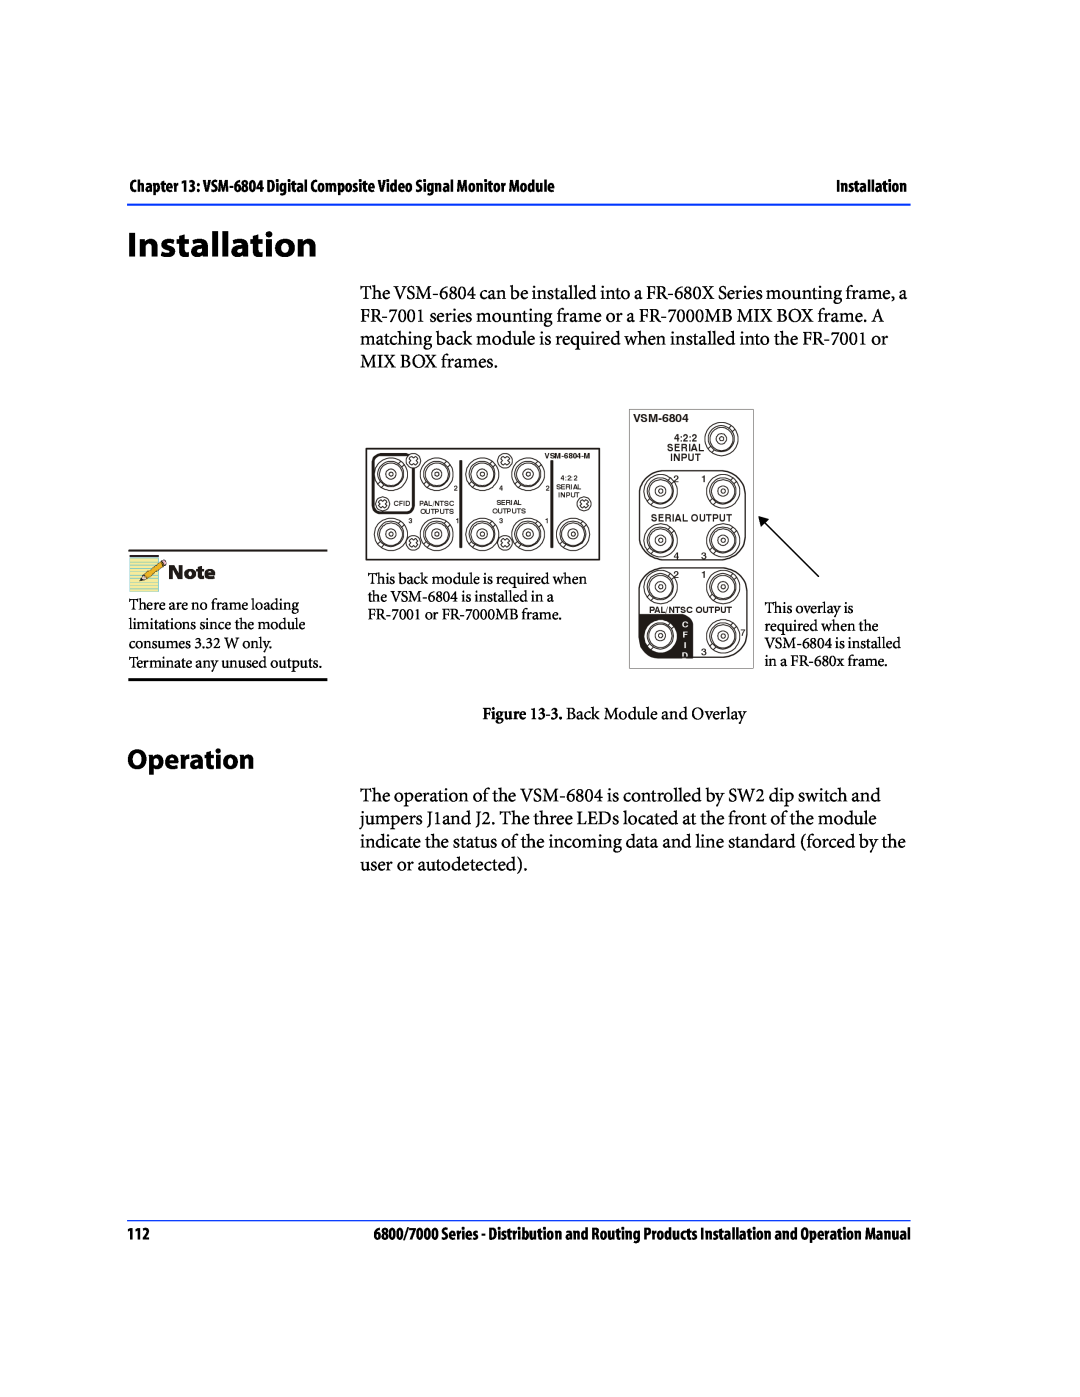 Nokia 7000 Series, 6800 Series operation manual Installation, Operation, 3. Back Module and Overlay 